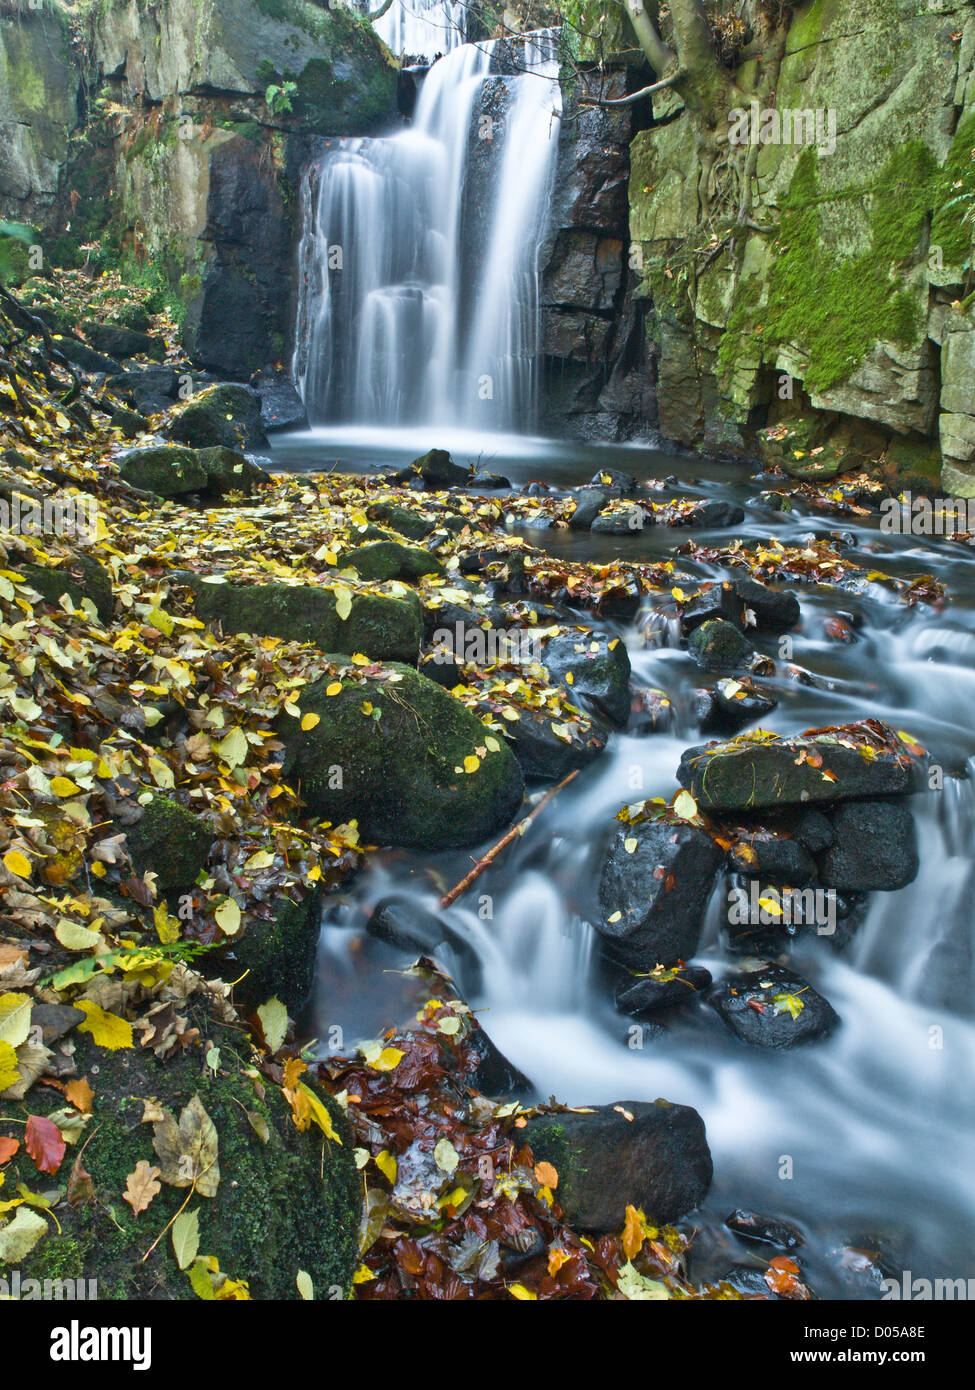 fast flowing waterfall over rocks covered in autumn leaves Stock Photo